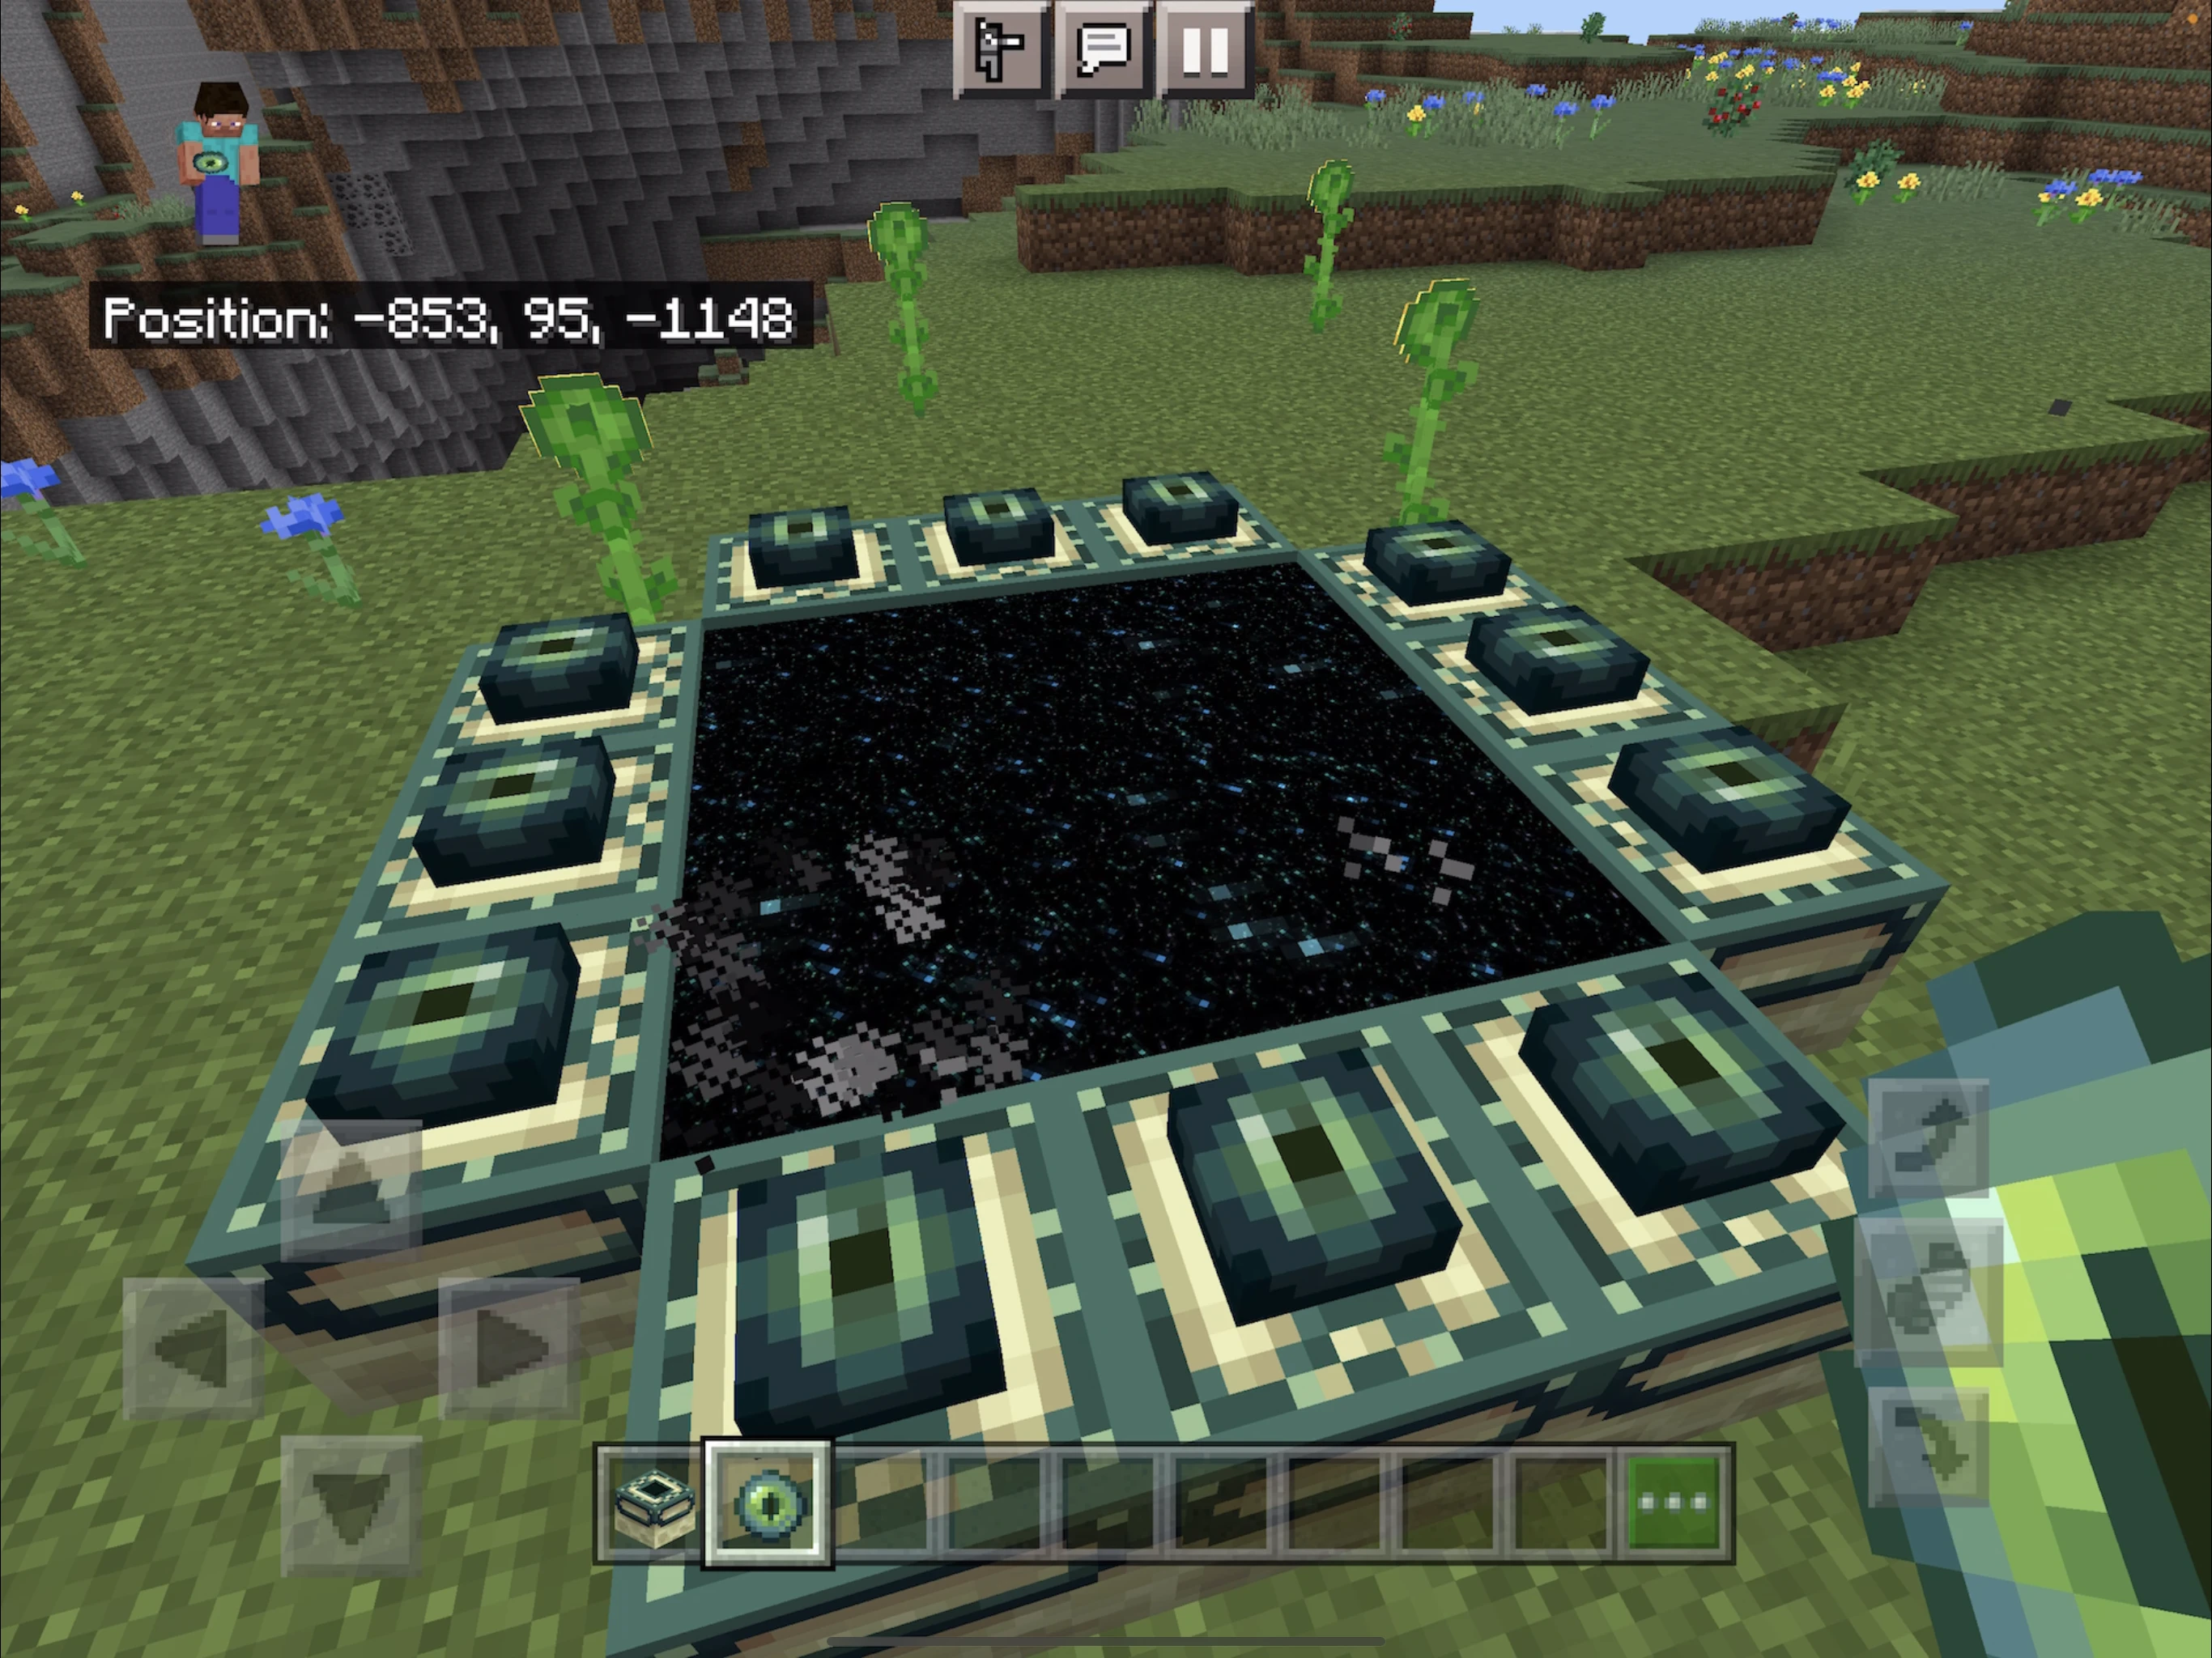 How to create a simple enderman farm in the End in Minecraft